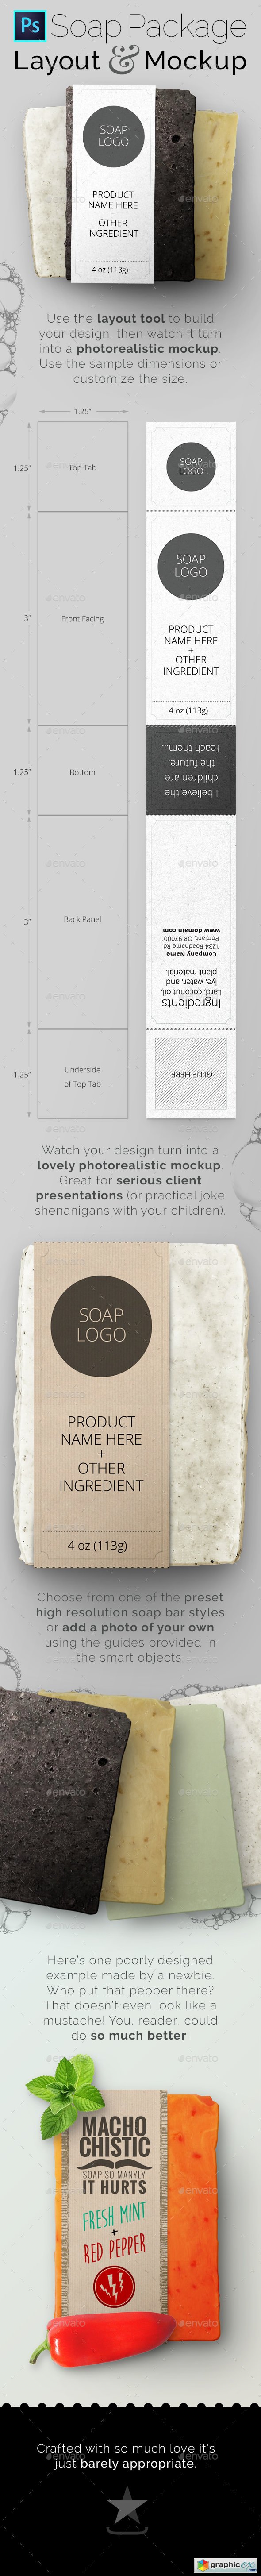 Soap Bar Package Tool and Mockup